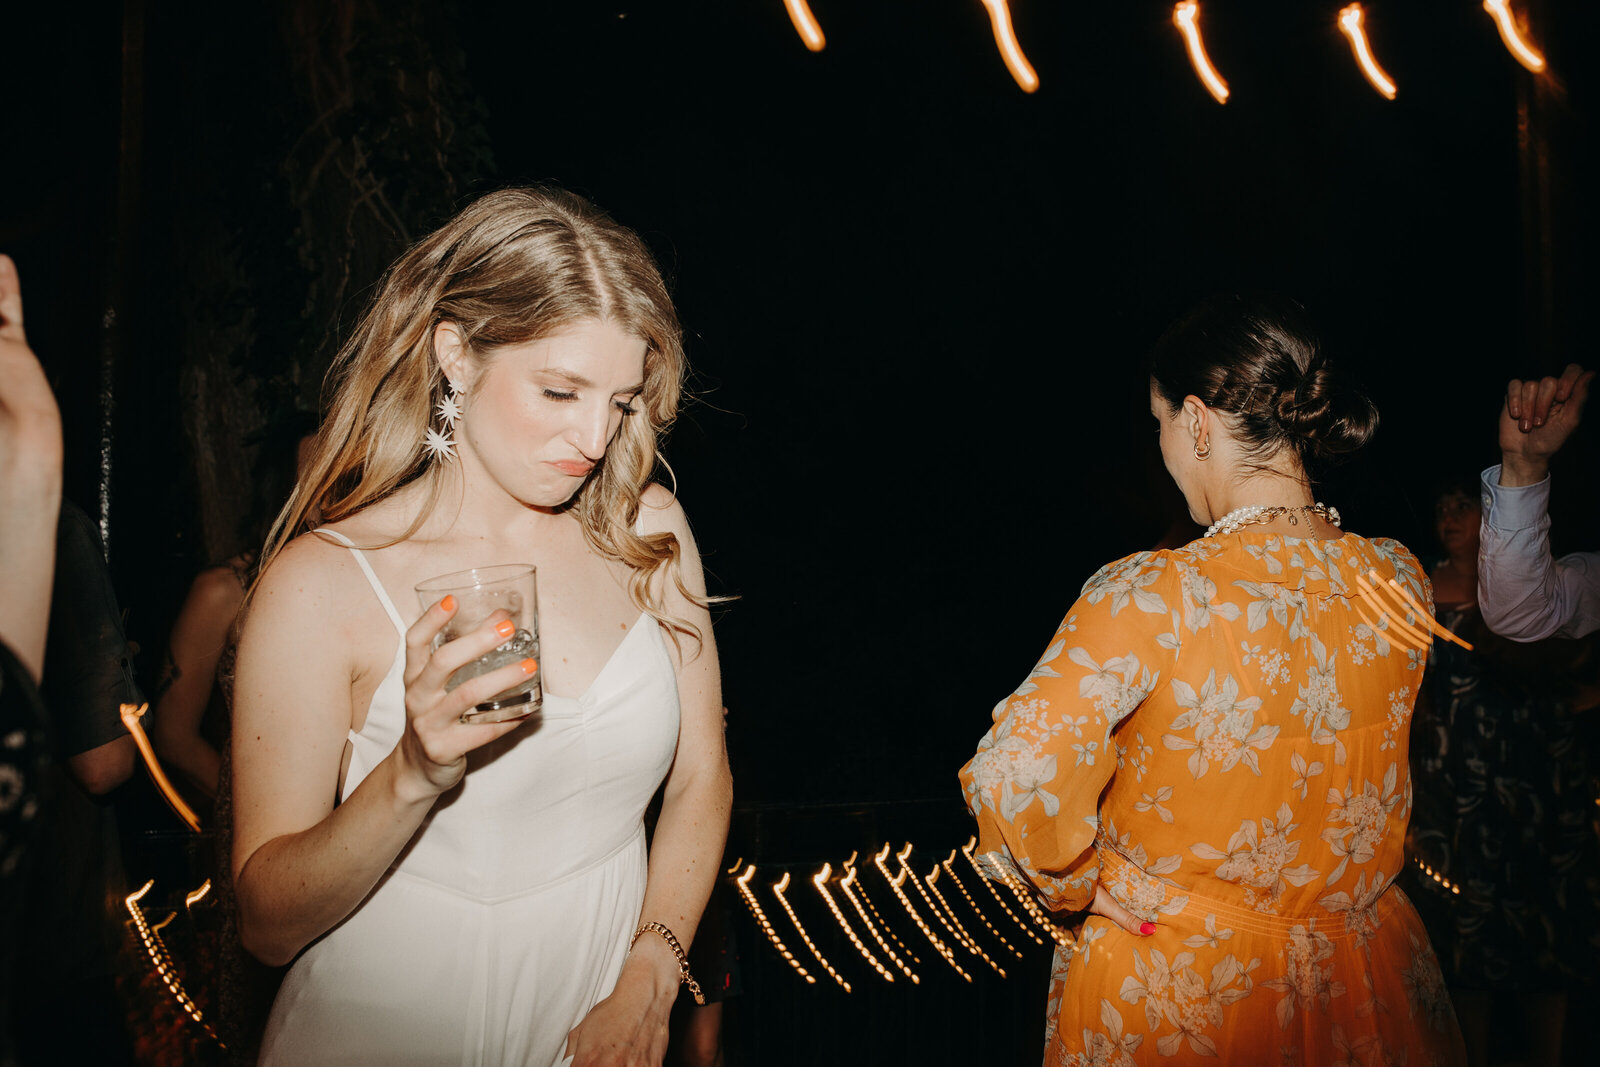 Bride dancing with drink in hand